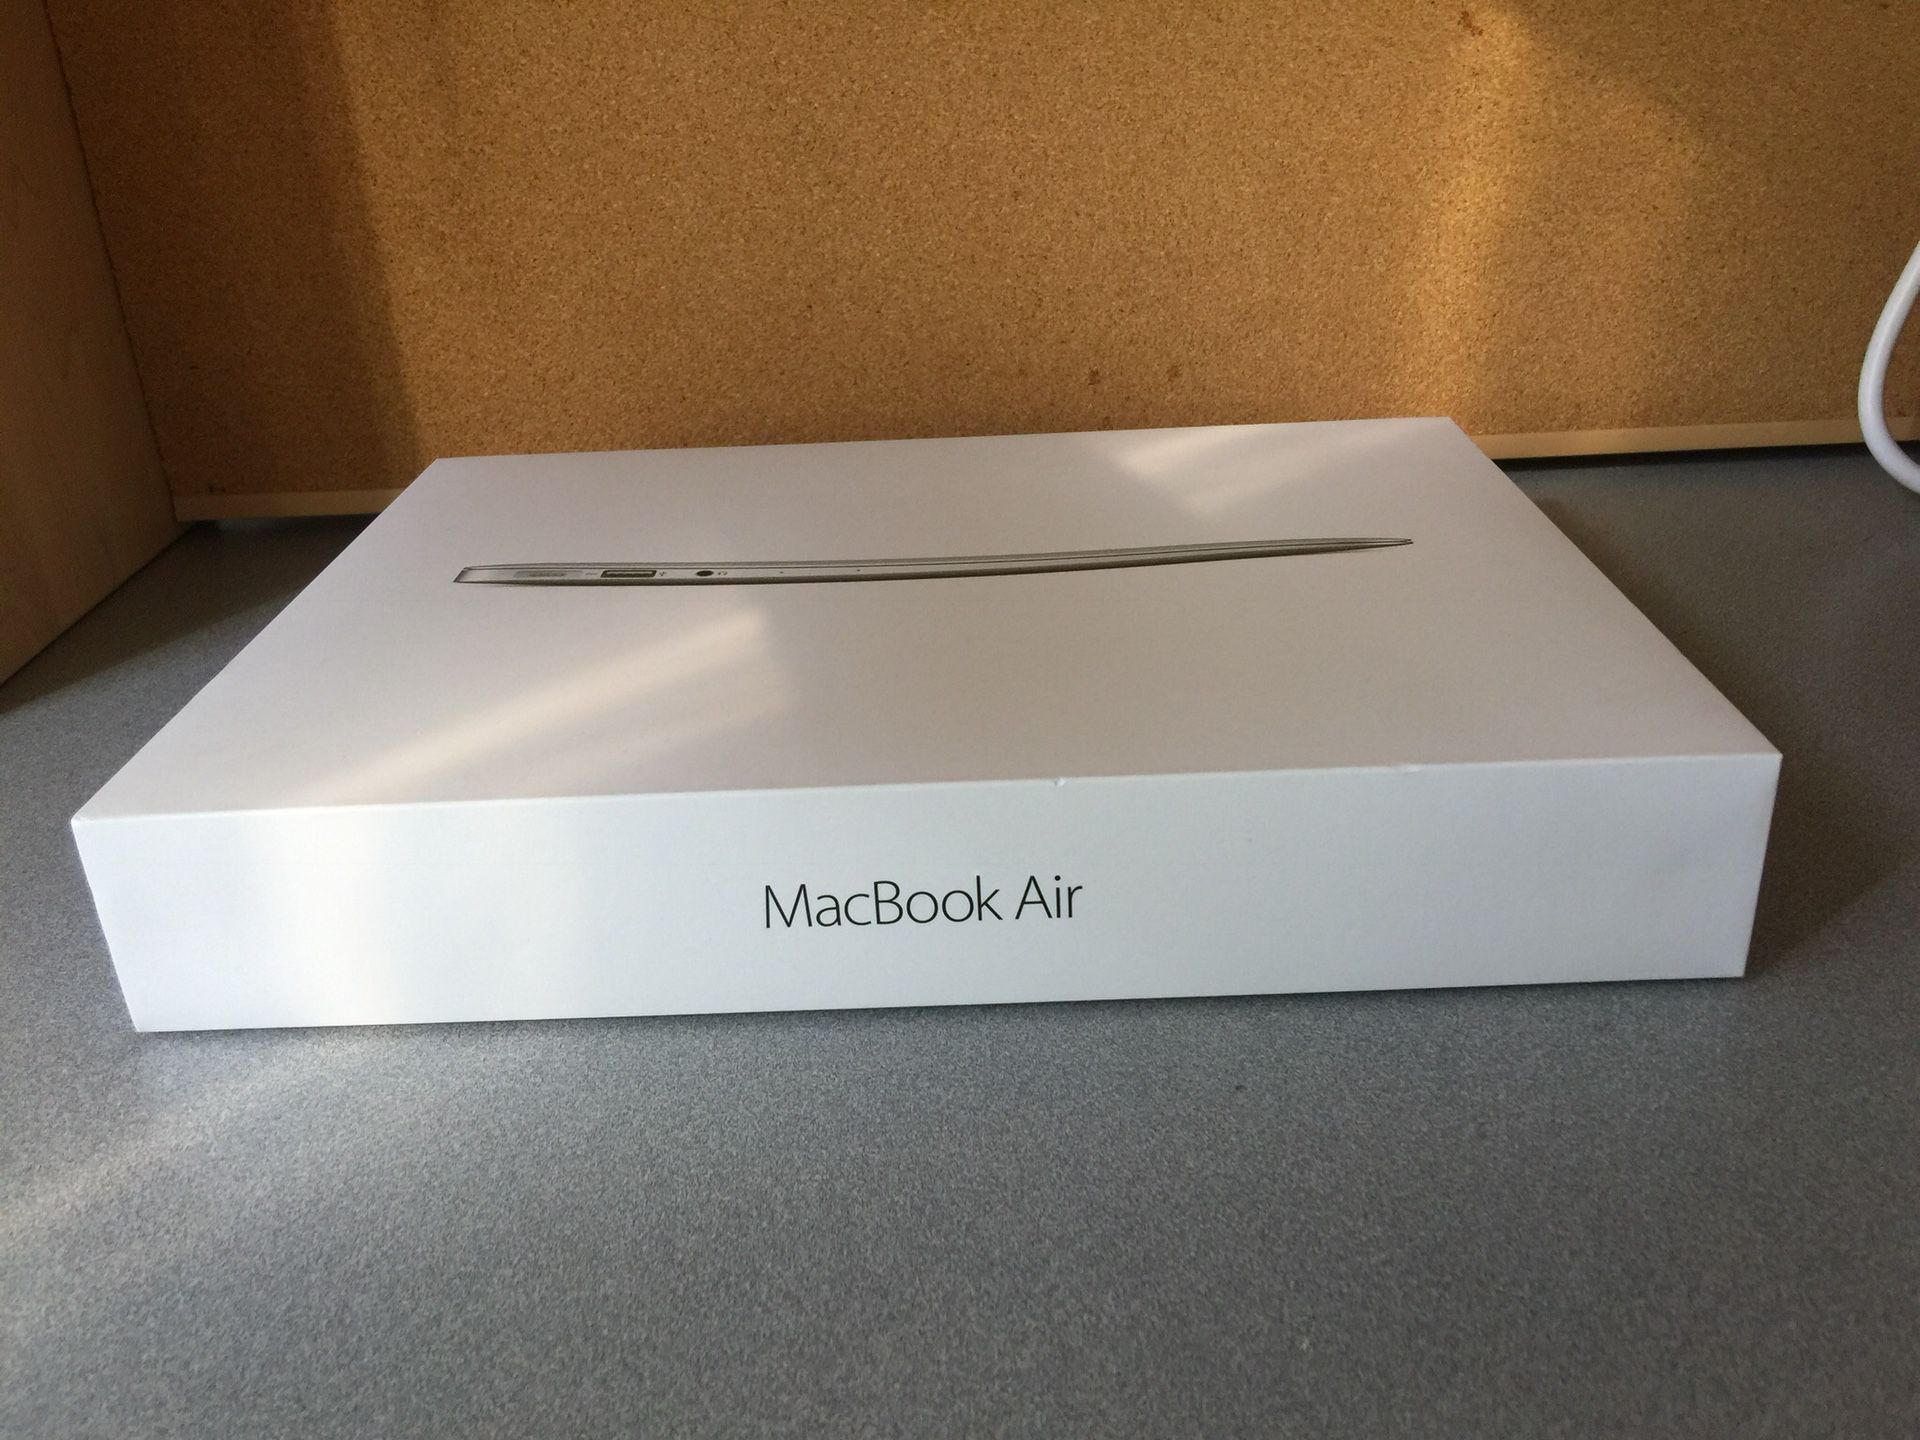 256 GB MacBook Air 13’ Model and Beats Solo3 Wireless